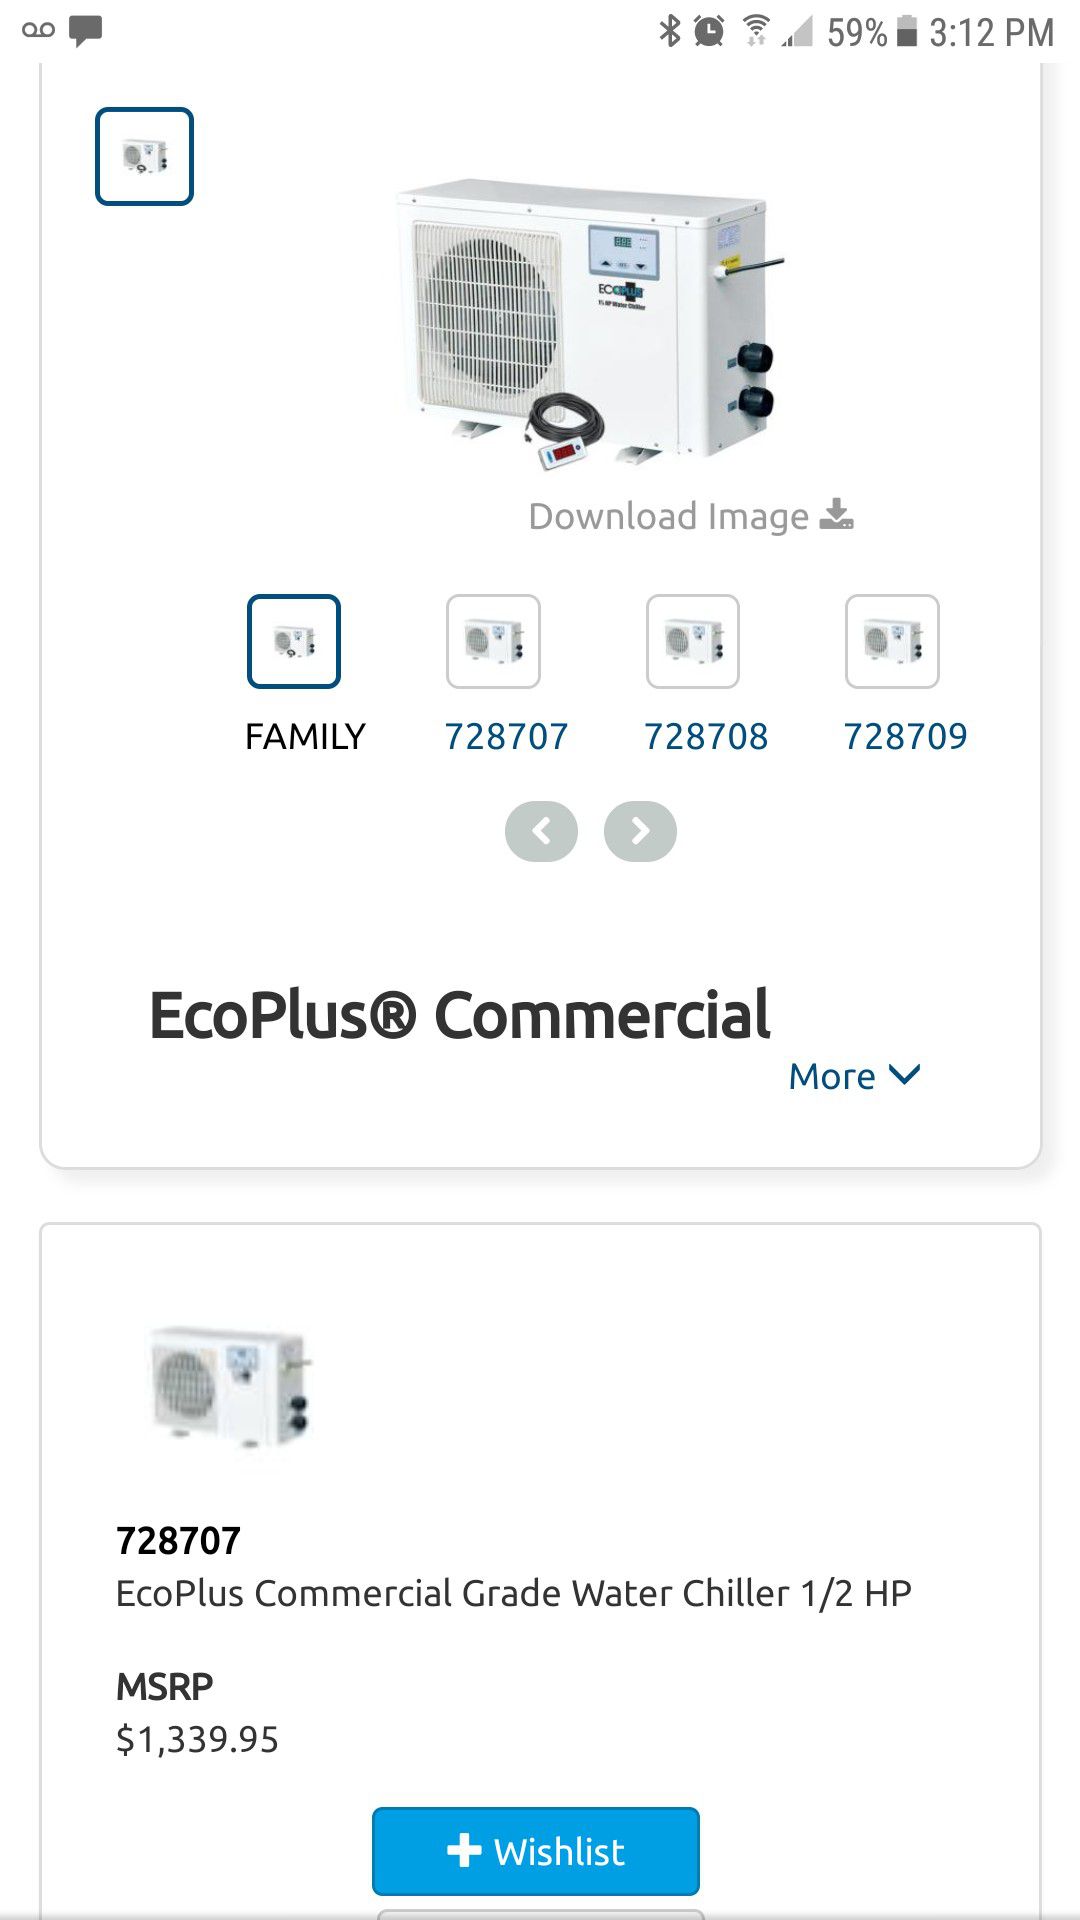 Water chillers have all for 200$ cash not hooked up in storage 1 white ecoplus cost over 1k new !